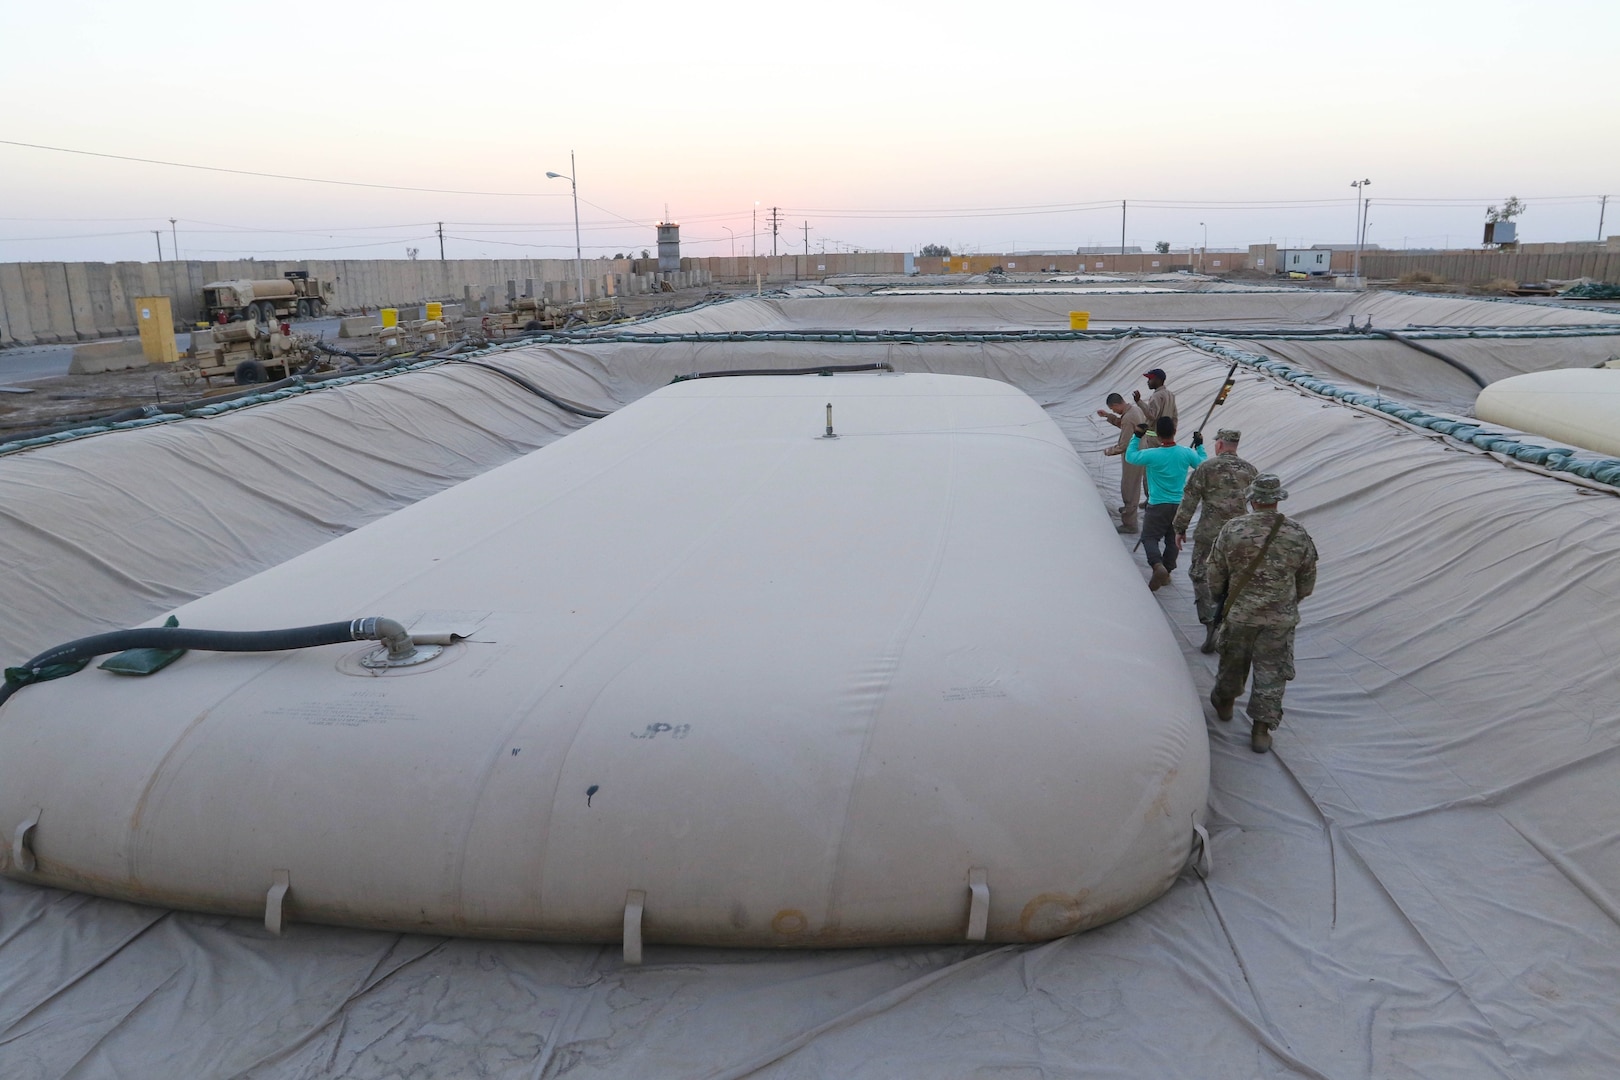 Inspectors General from the 1st Theater Sustainment Command-Operational Command Post inspect a fuel “bladder” at a fuel farm in central Iraq, recently. U.S. Army Central uses forward logistical elements to maintain fuel farms under contract with U.S. Army logistical specialists called contract representatives to ensure the operation is being conducted to the Army standard. (U.S. Army photo by Sgt. Brandon Hubbard, USARCENT Public Affairs)